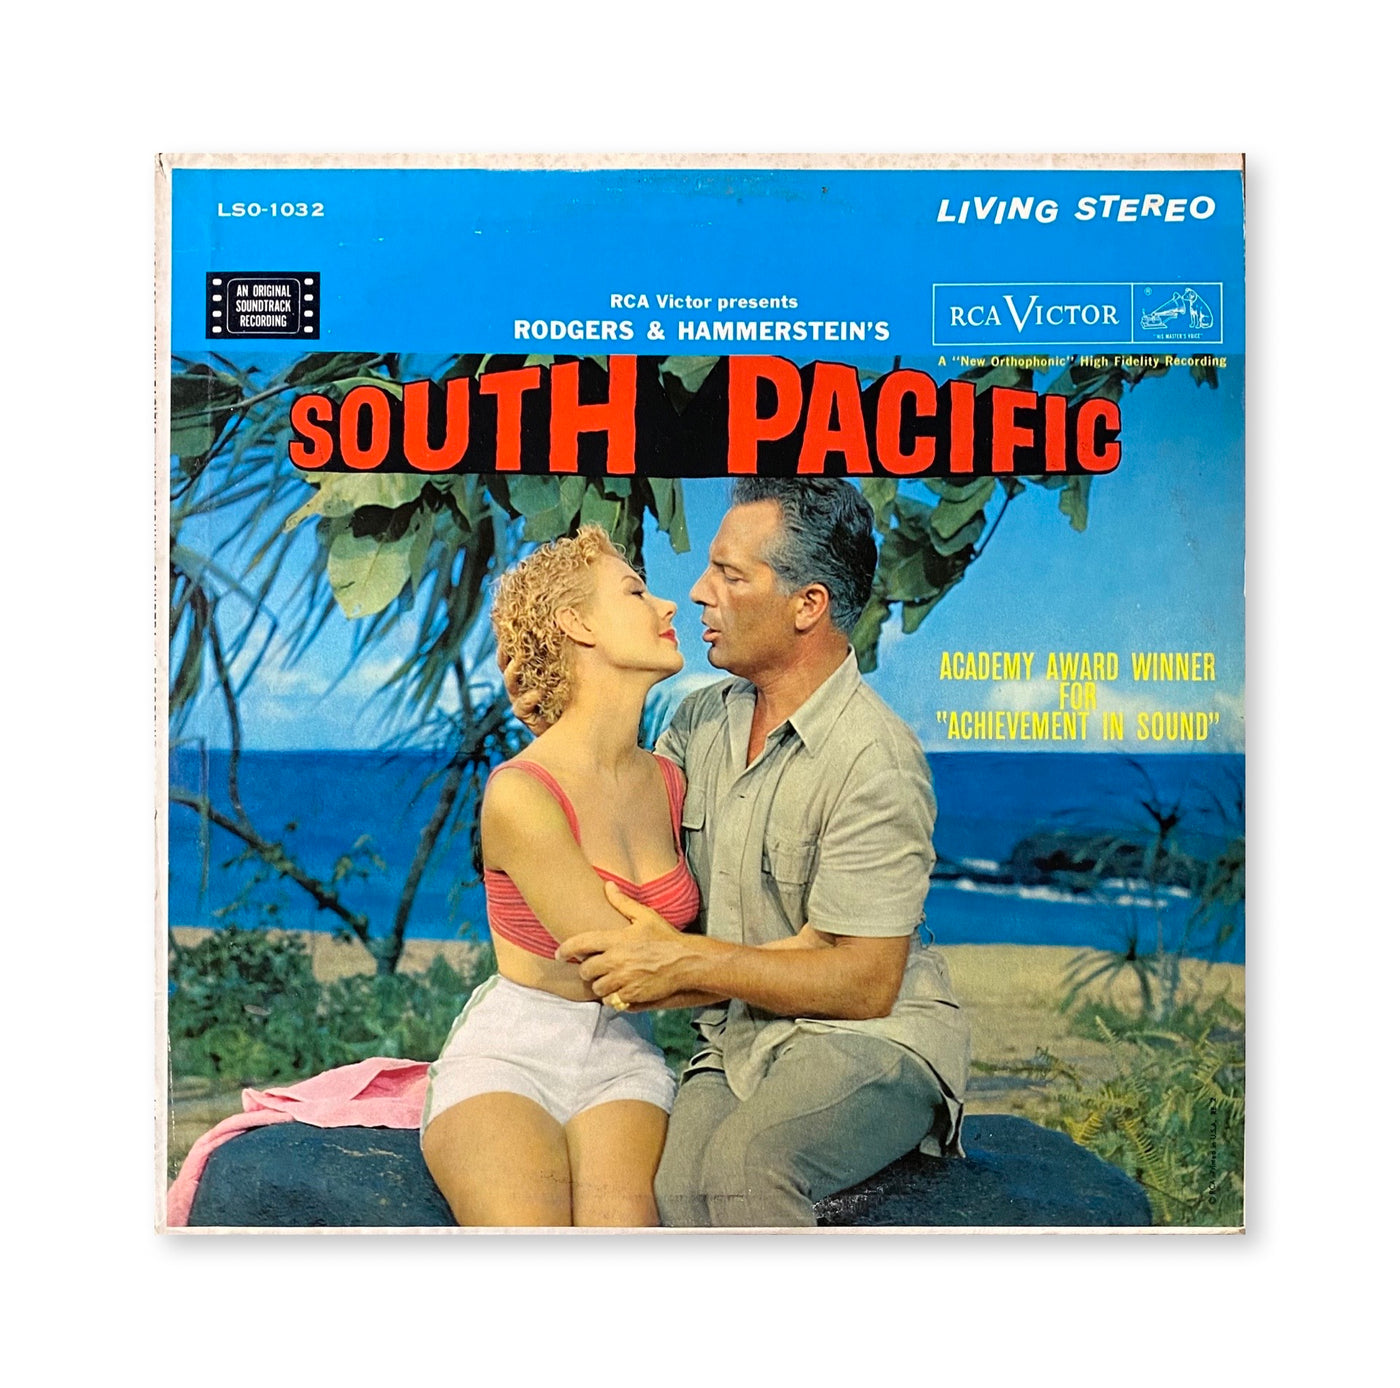 Rodgers & Hammerstein - RCA Victor Presents Rodgers & Hammerstein's South Pacific (An Original Soundtrack Recording)